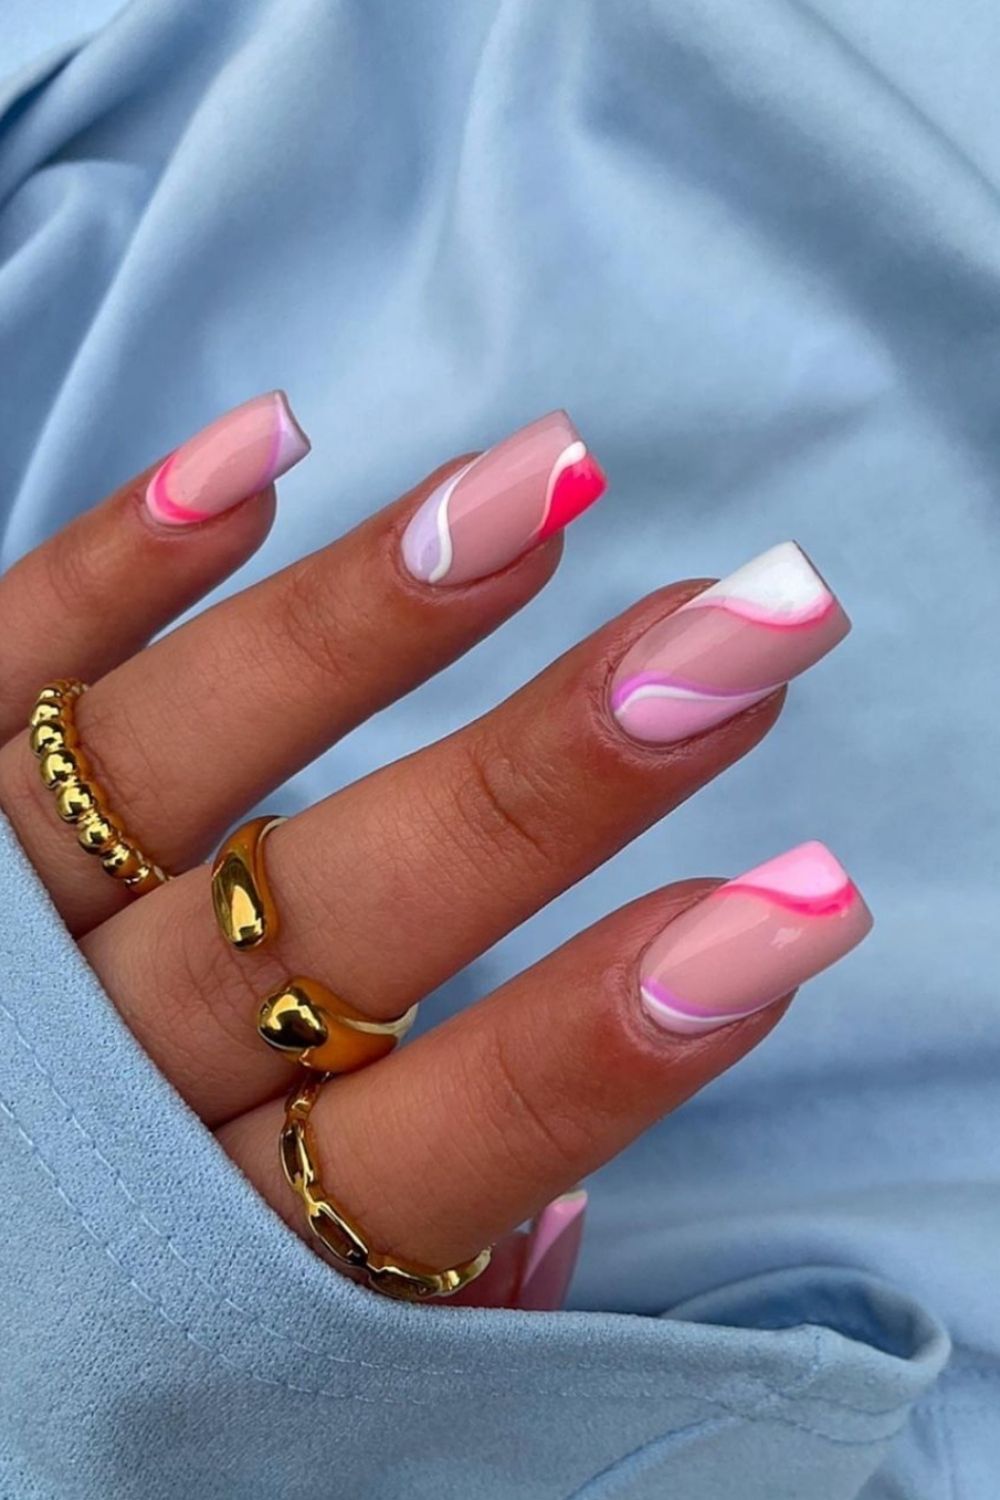 90+ Best Fall nail colors 2021 And Autumn nail design to fresh your looks